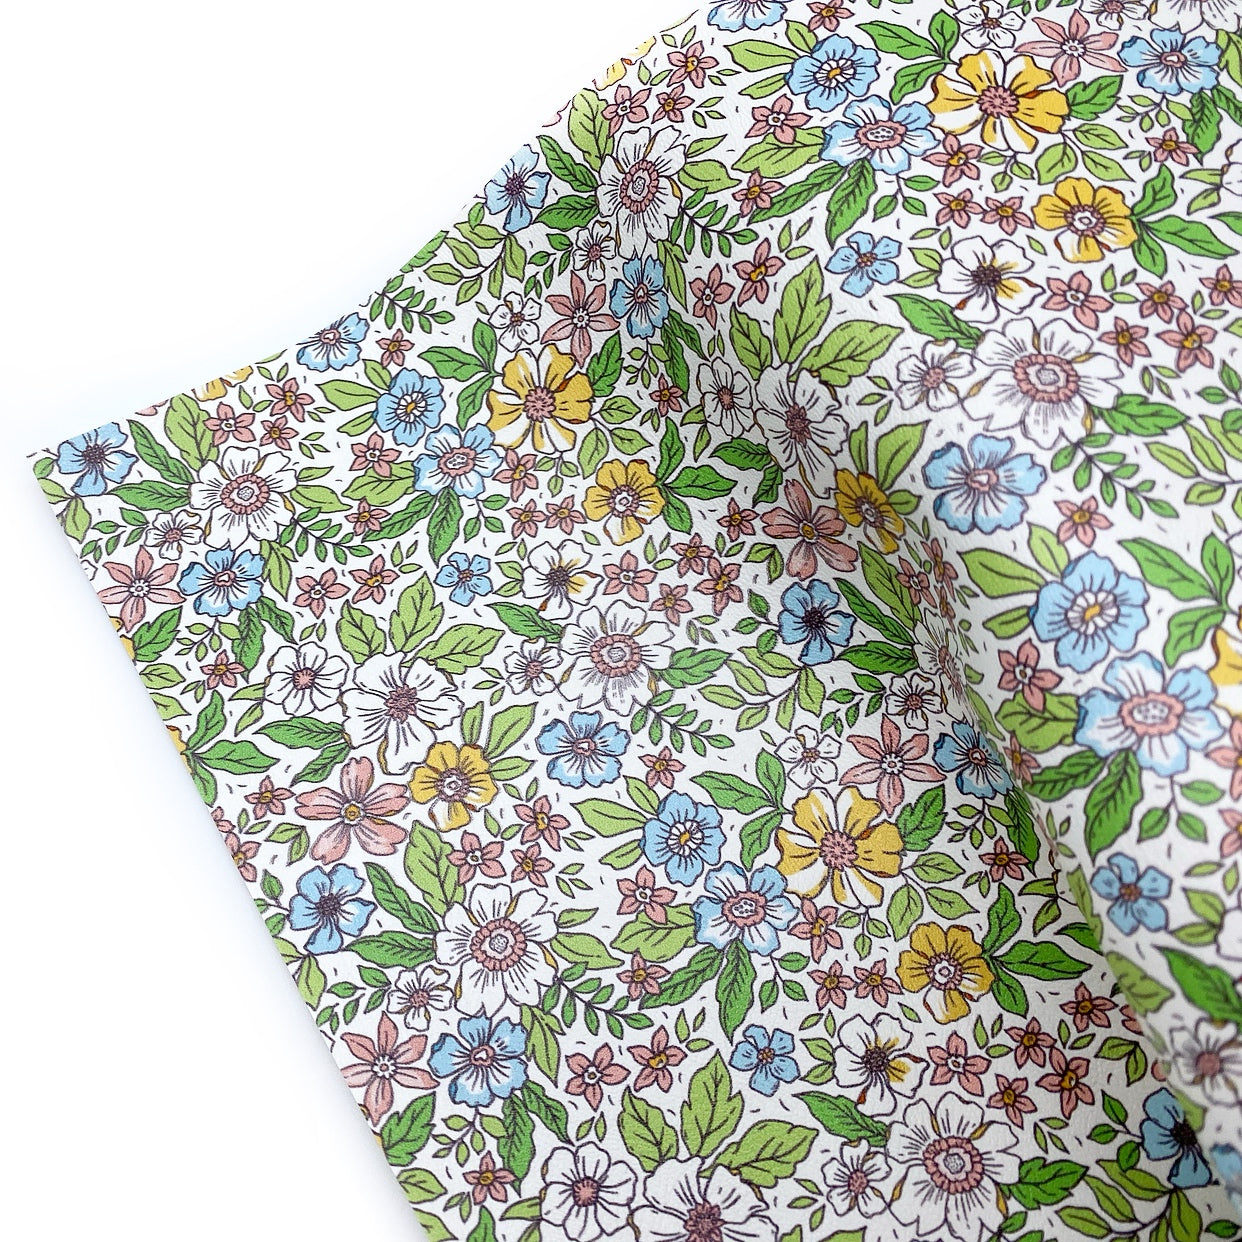 Summer Garden Floral Premium Faux Leather Fabric Sheets